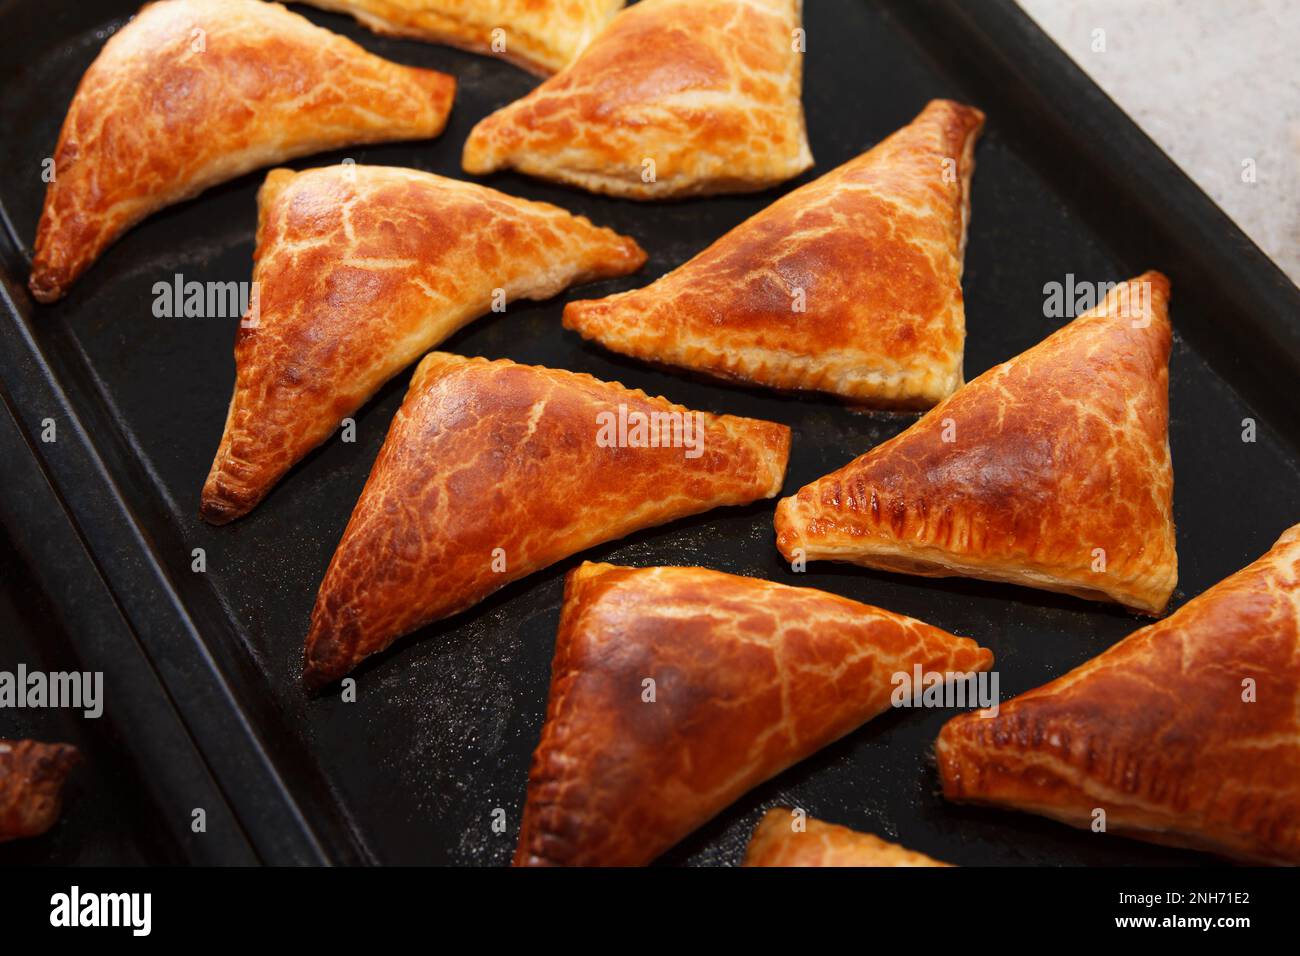 Freshly baked delicious hot patties filled with oven, triangular shape lie on a baking sheet Stock Photo